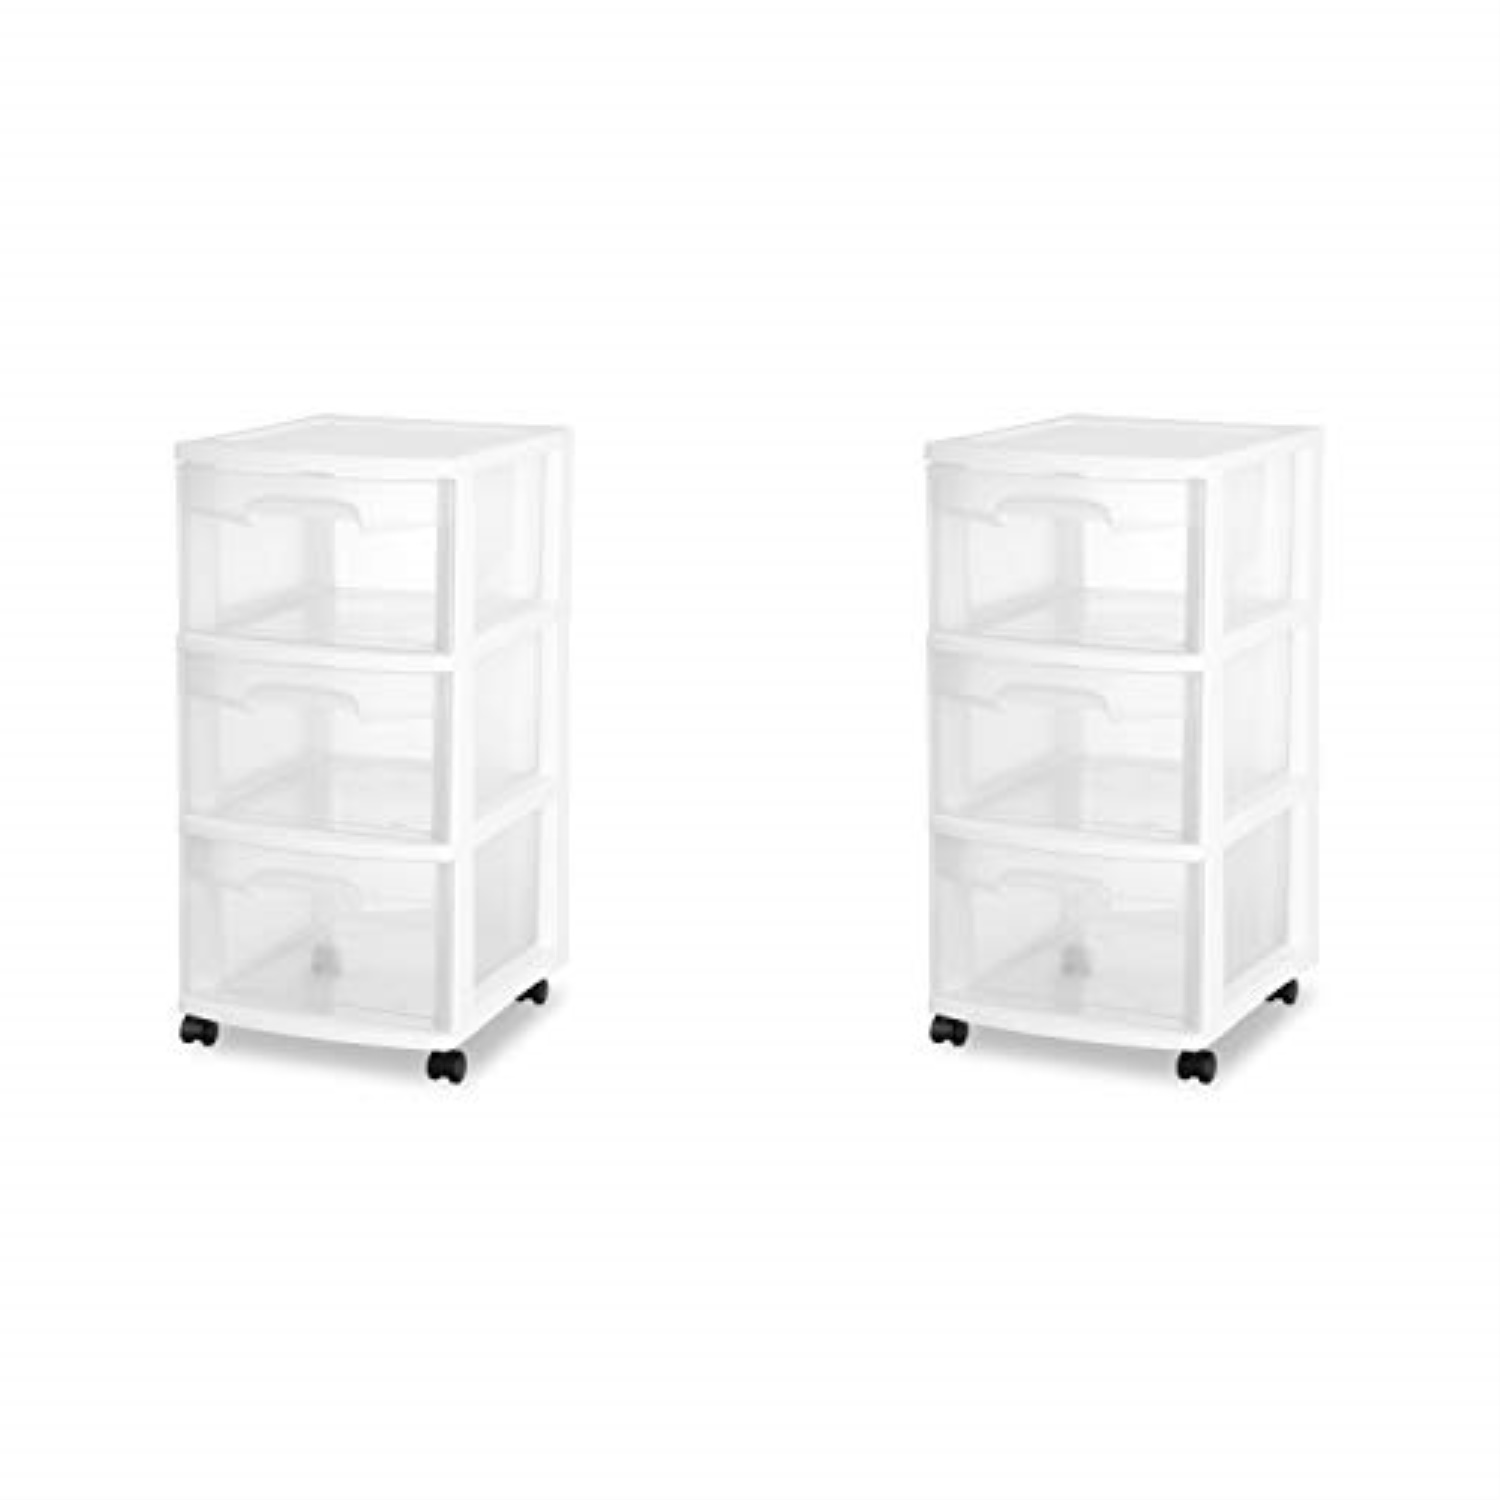 sterilite 28308002 3 drawer cart, white frame with clear drawers and black casters, 2-pack - image 1 of 2